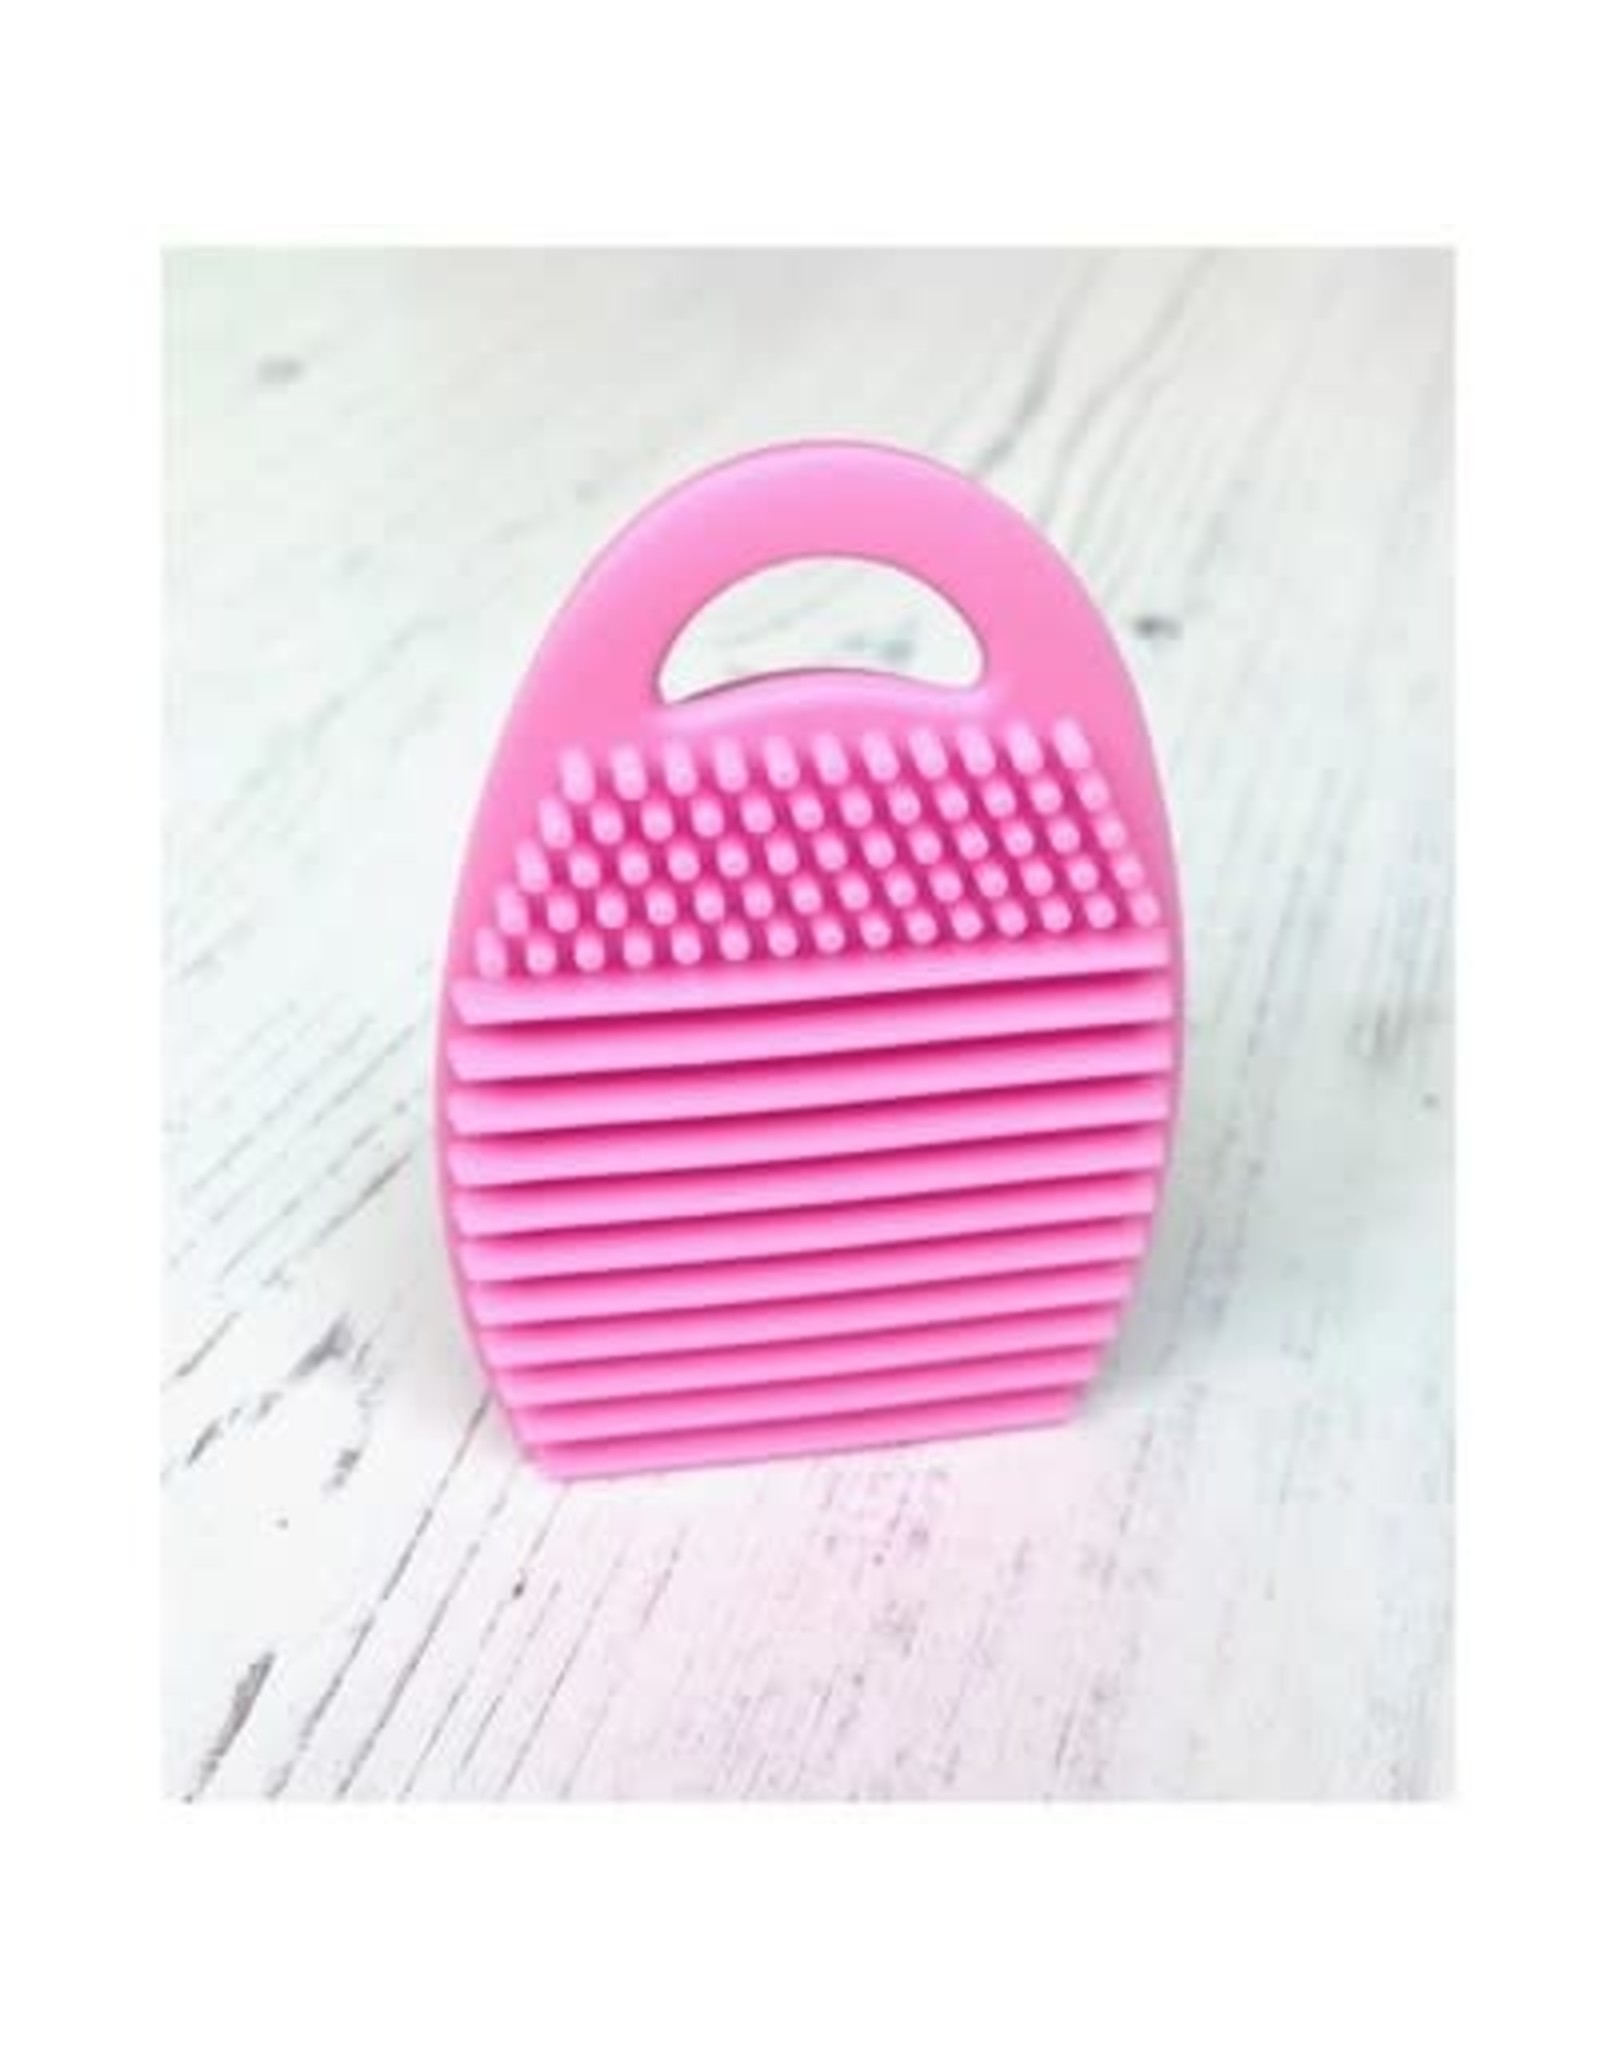 Taylored Expressions Blender Brush Cleaning Tool, Pink